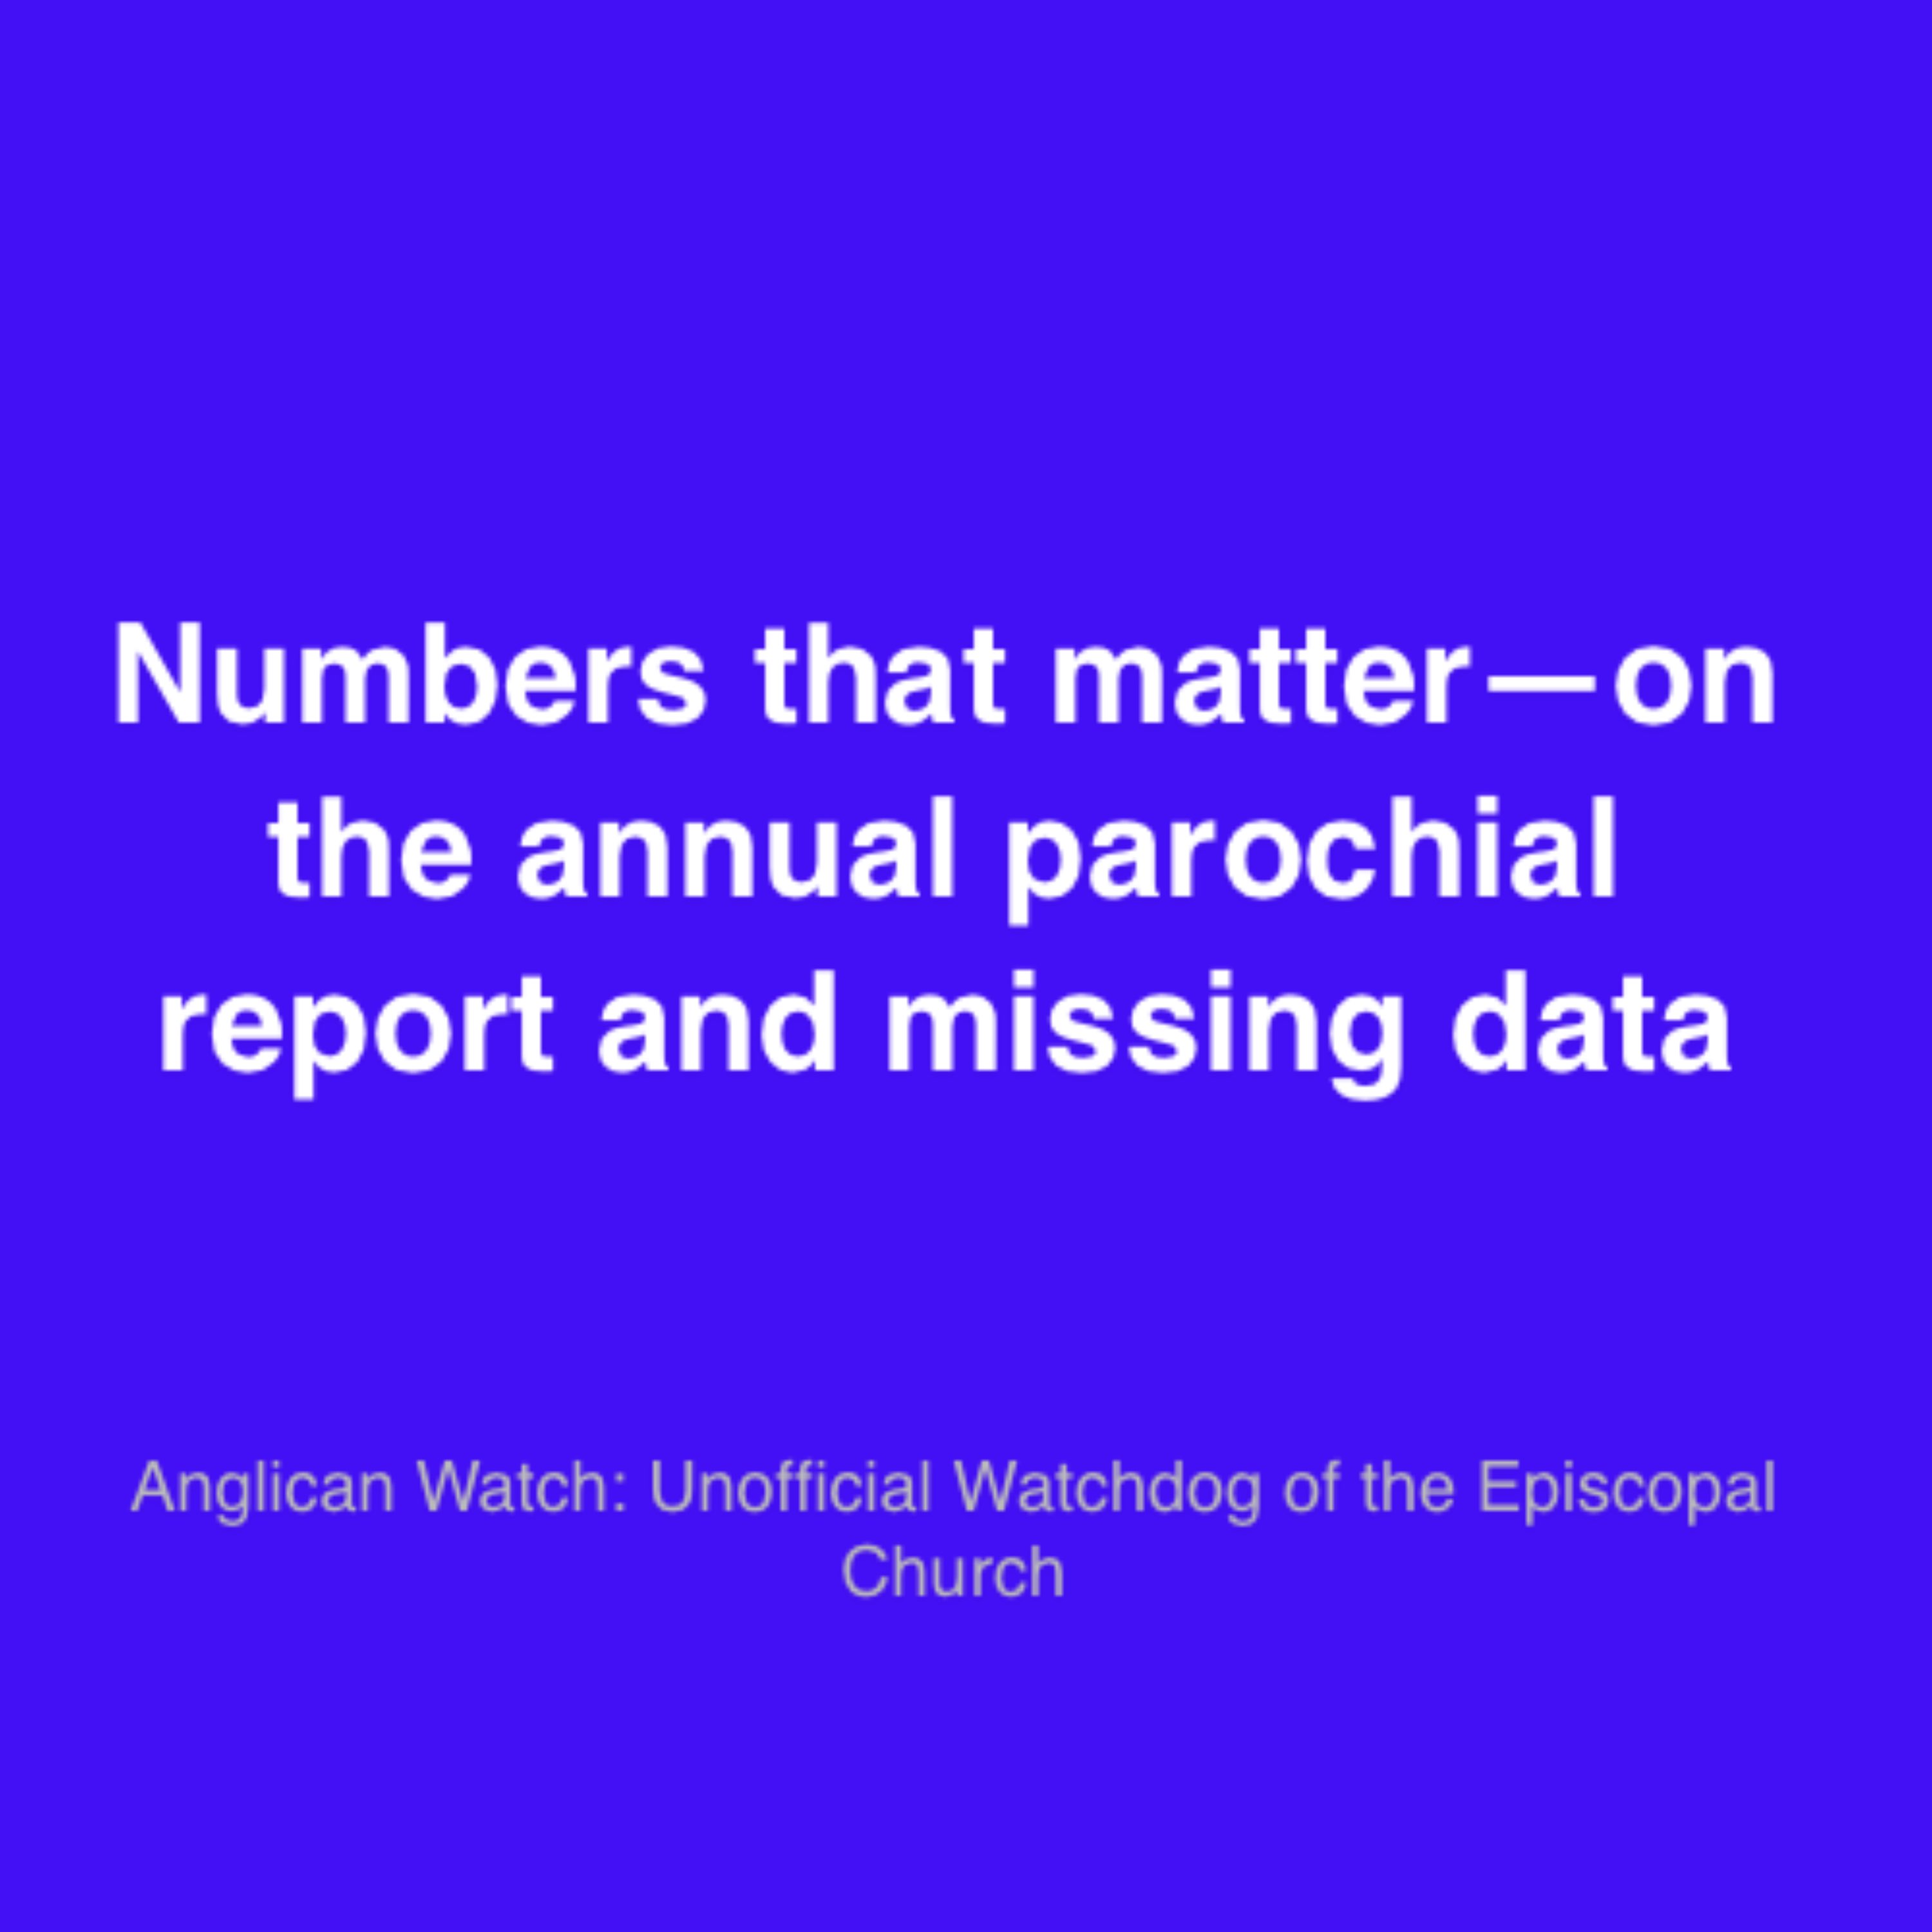 Numbers that matter—on the annual parochial report and missing data